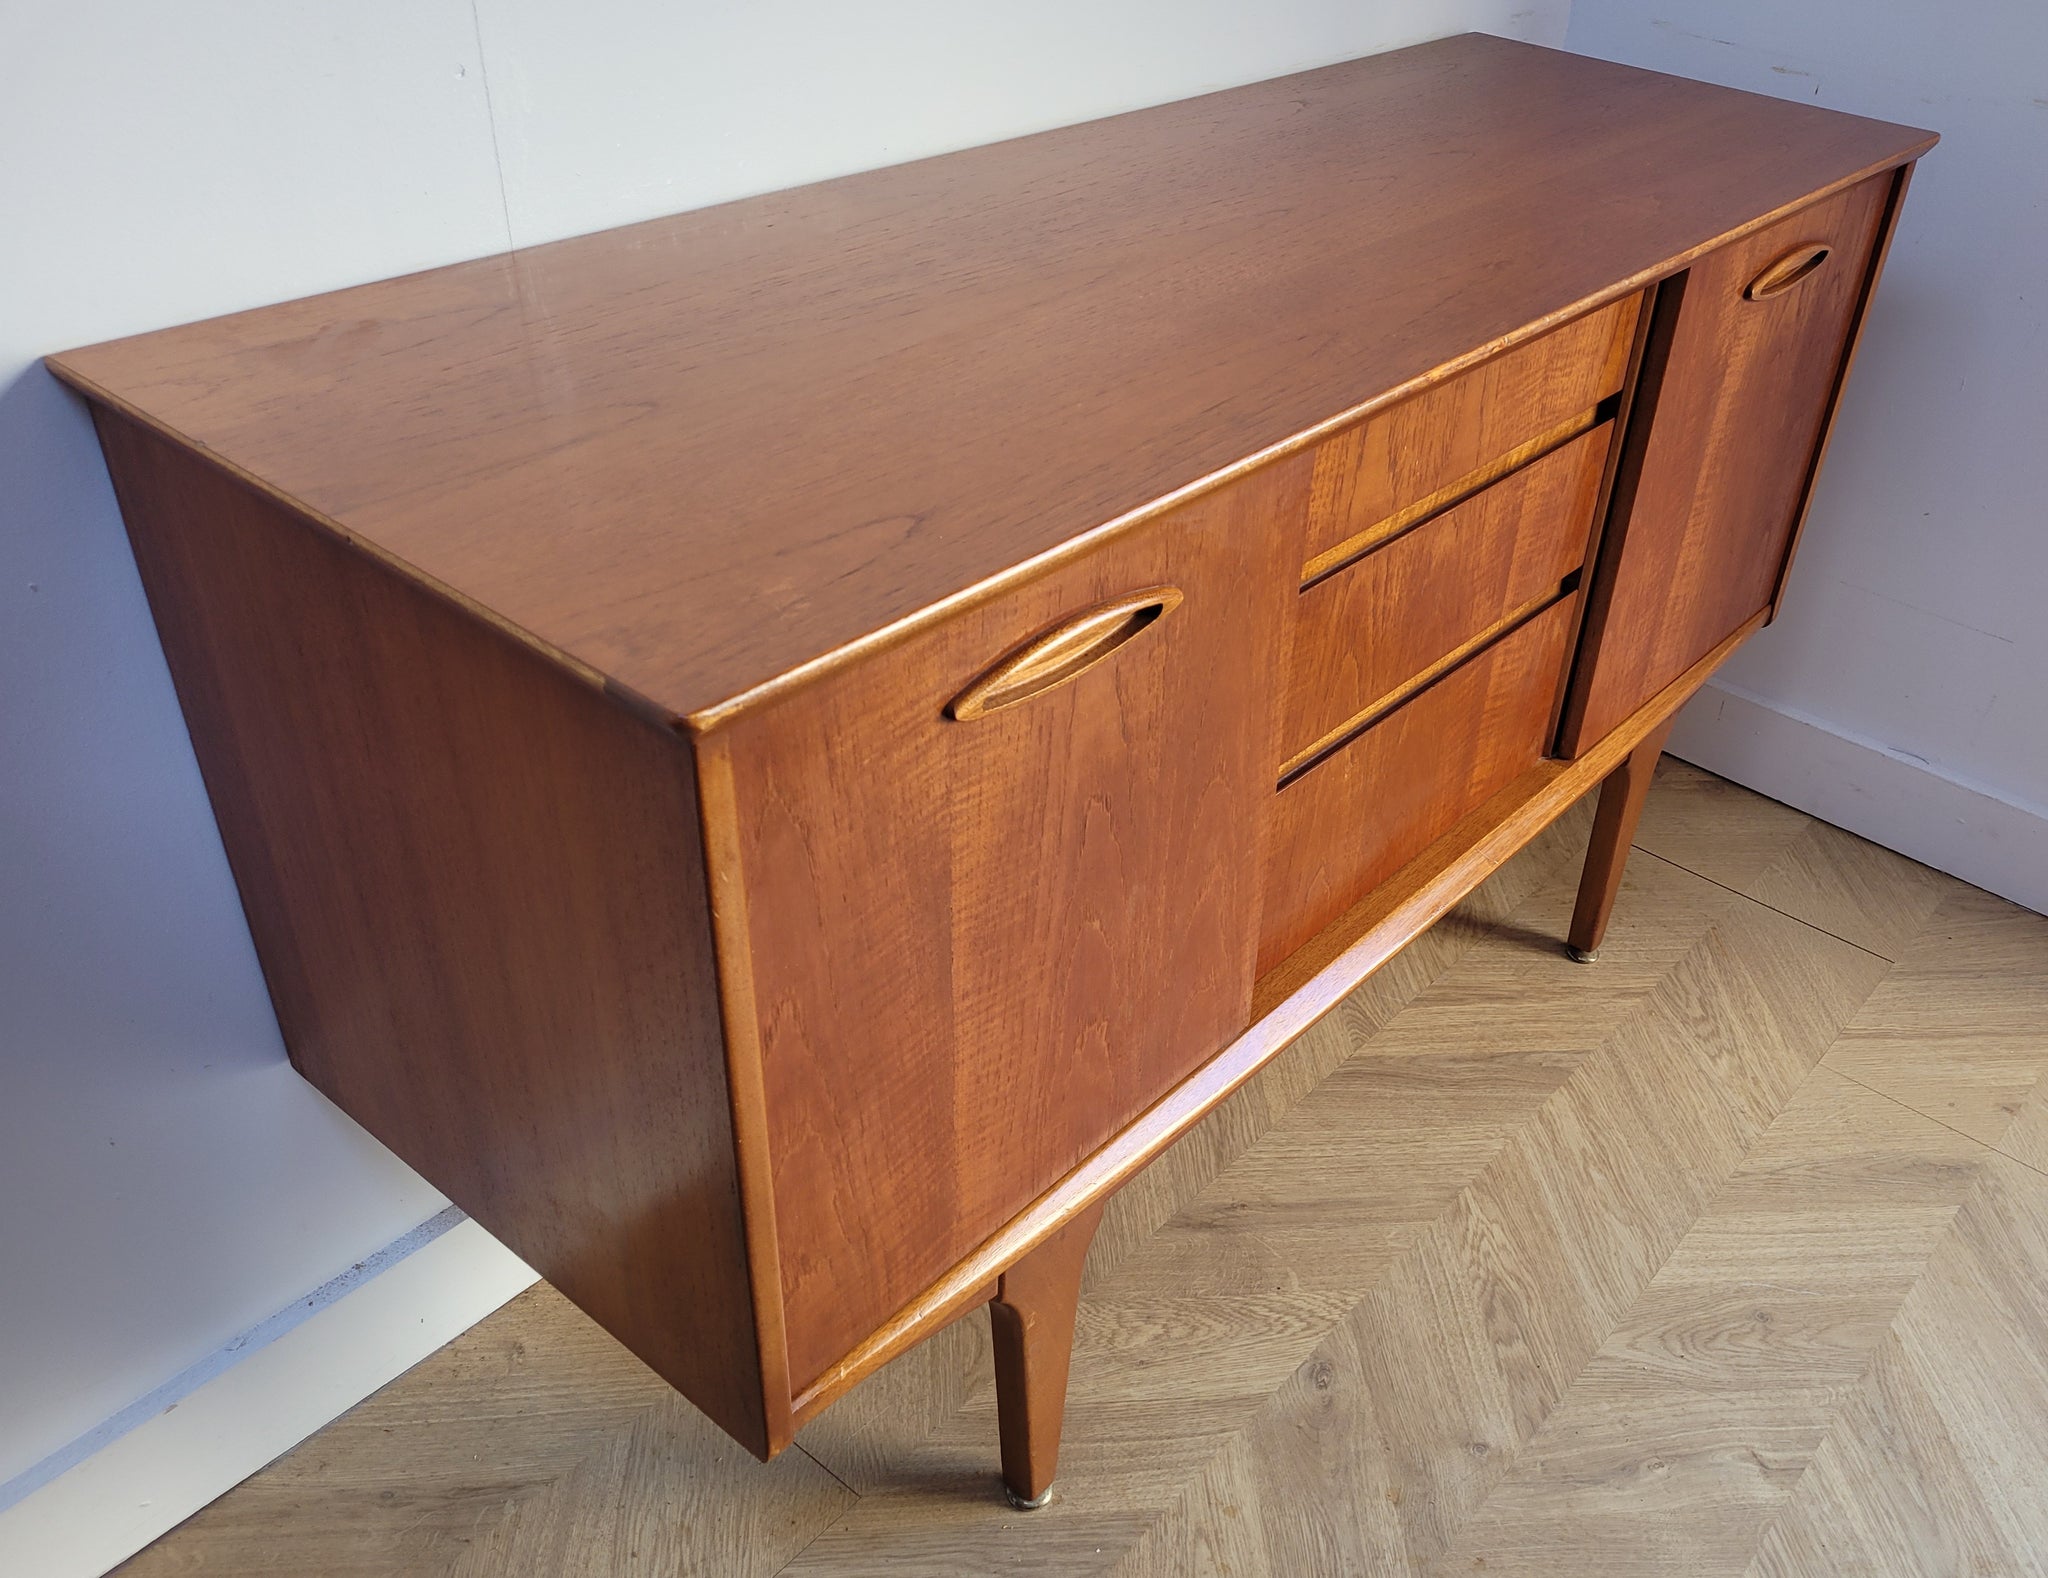 Jentique Compact Sideboard